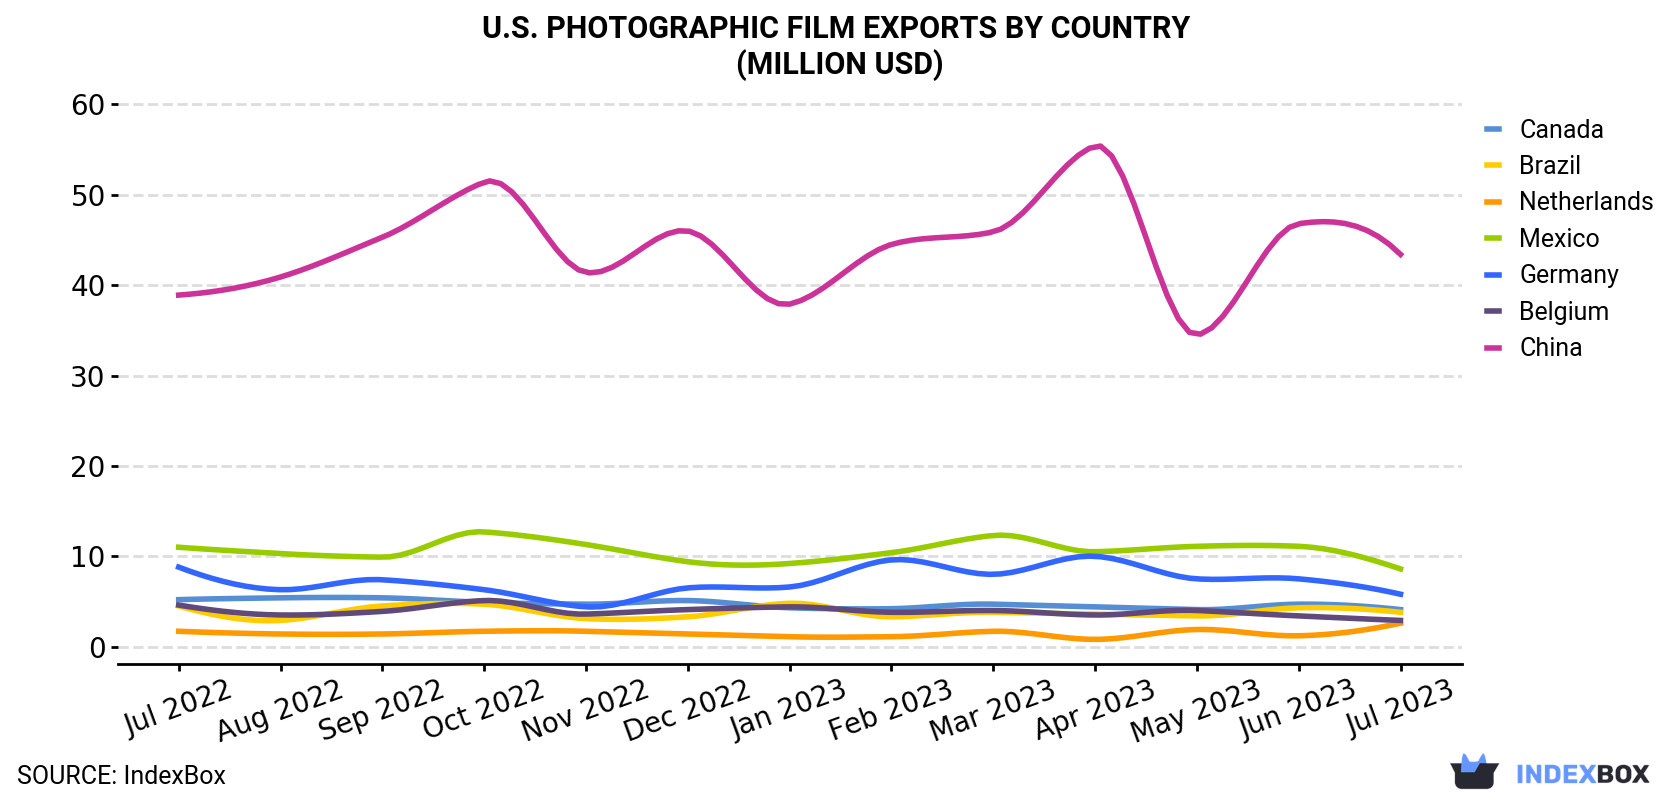 U.S. Photographic Film Exports By Country (Million USD)